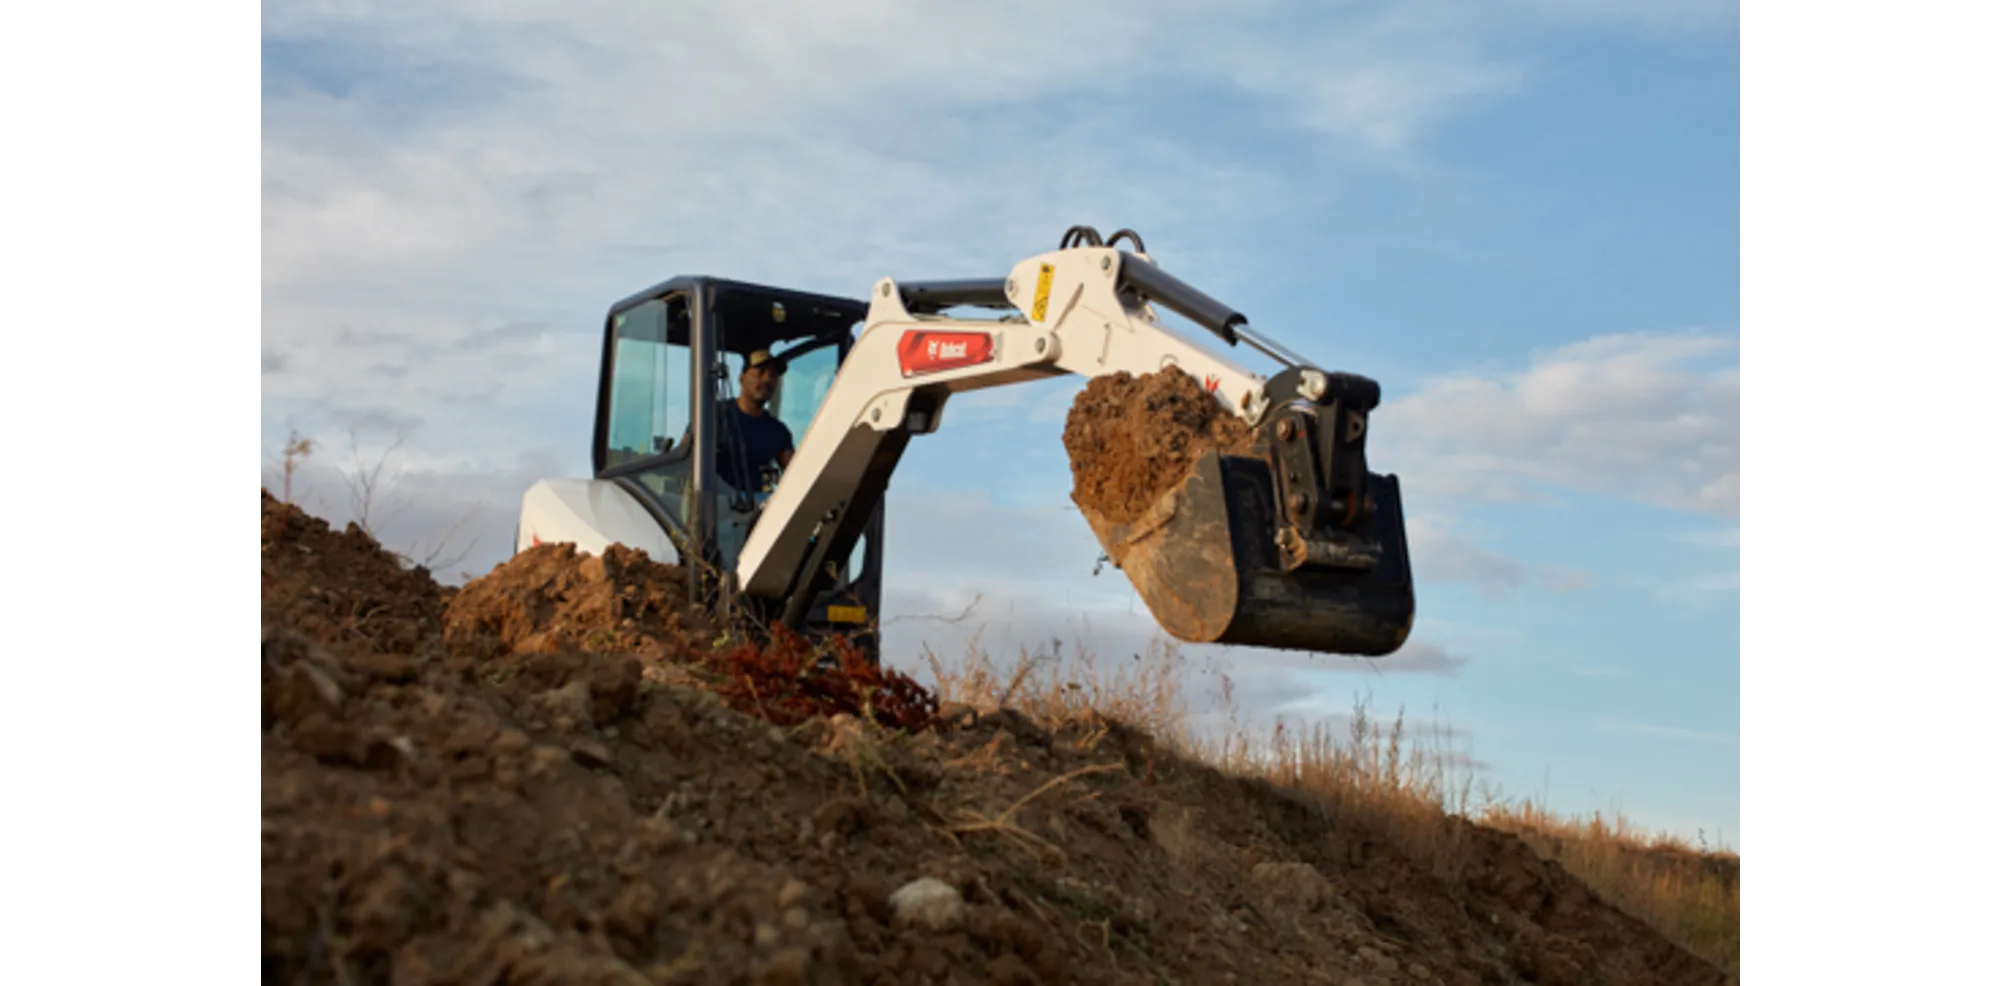 Browse Specs and more for the E32 Compact Excavator - K.C. Bobcat